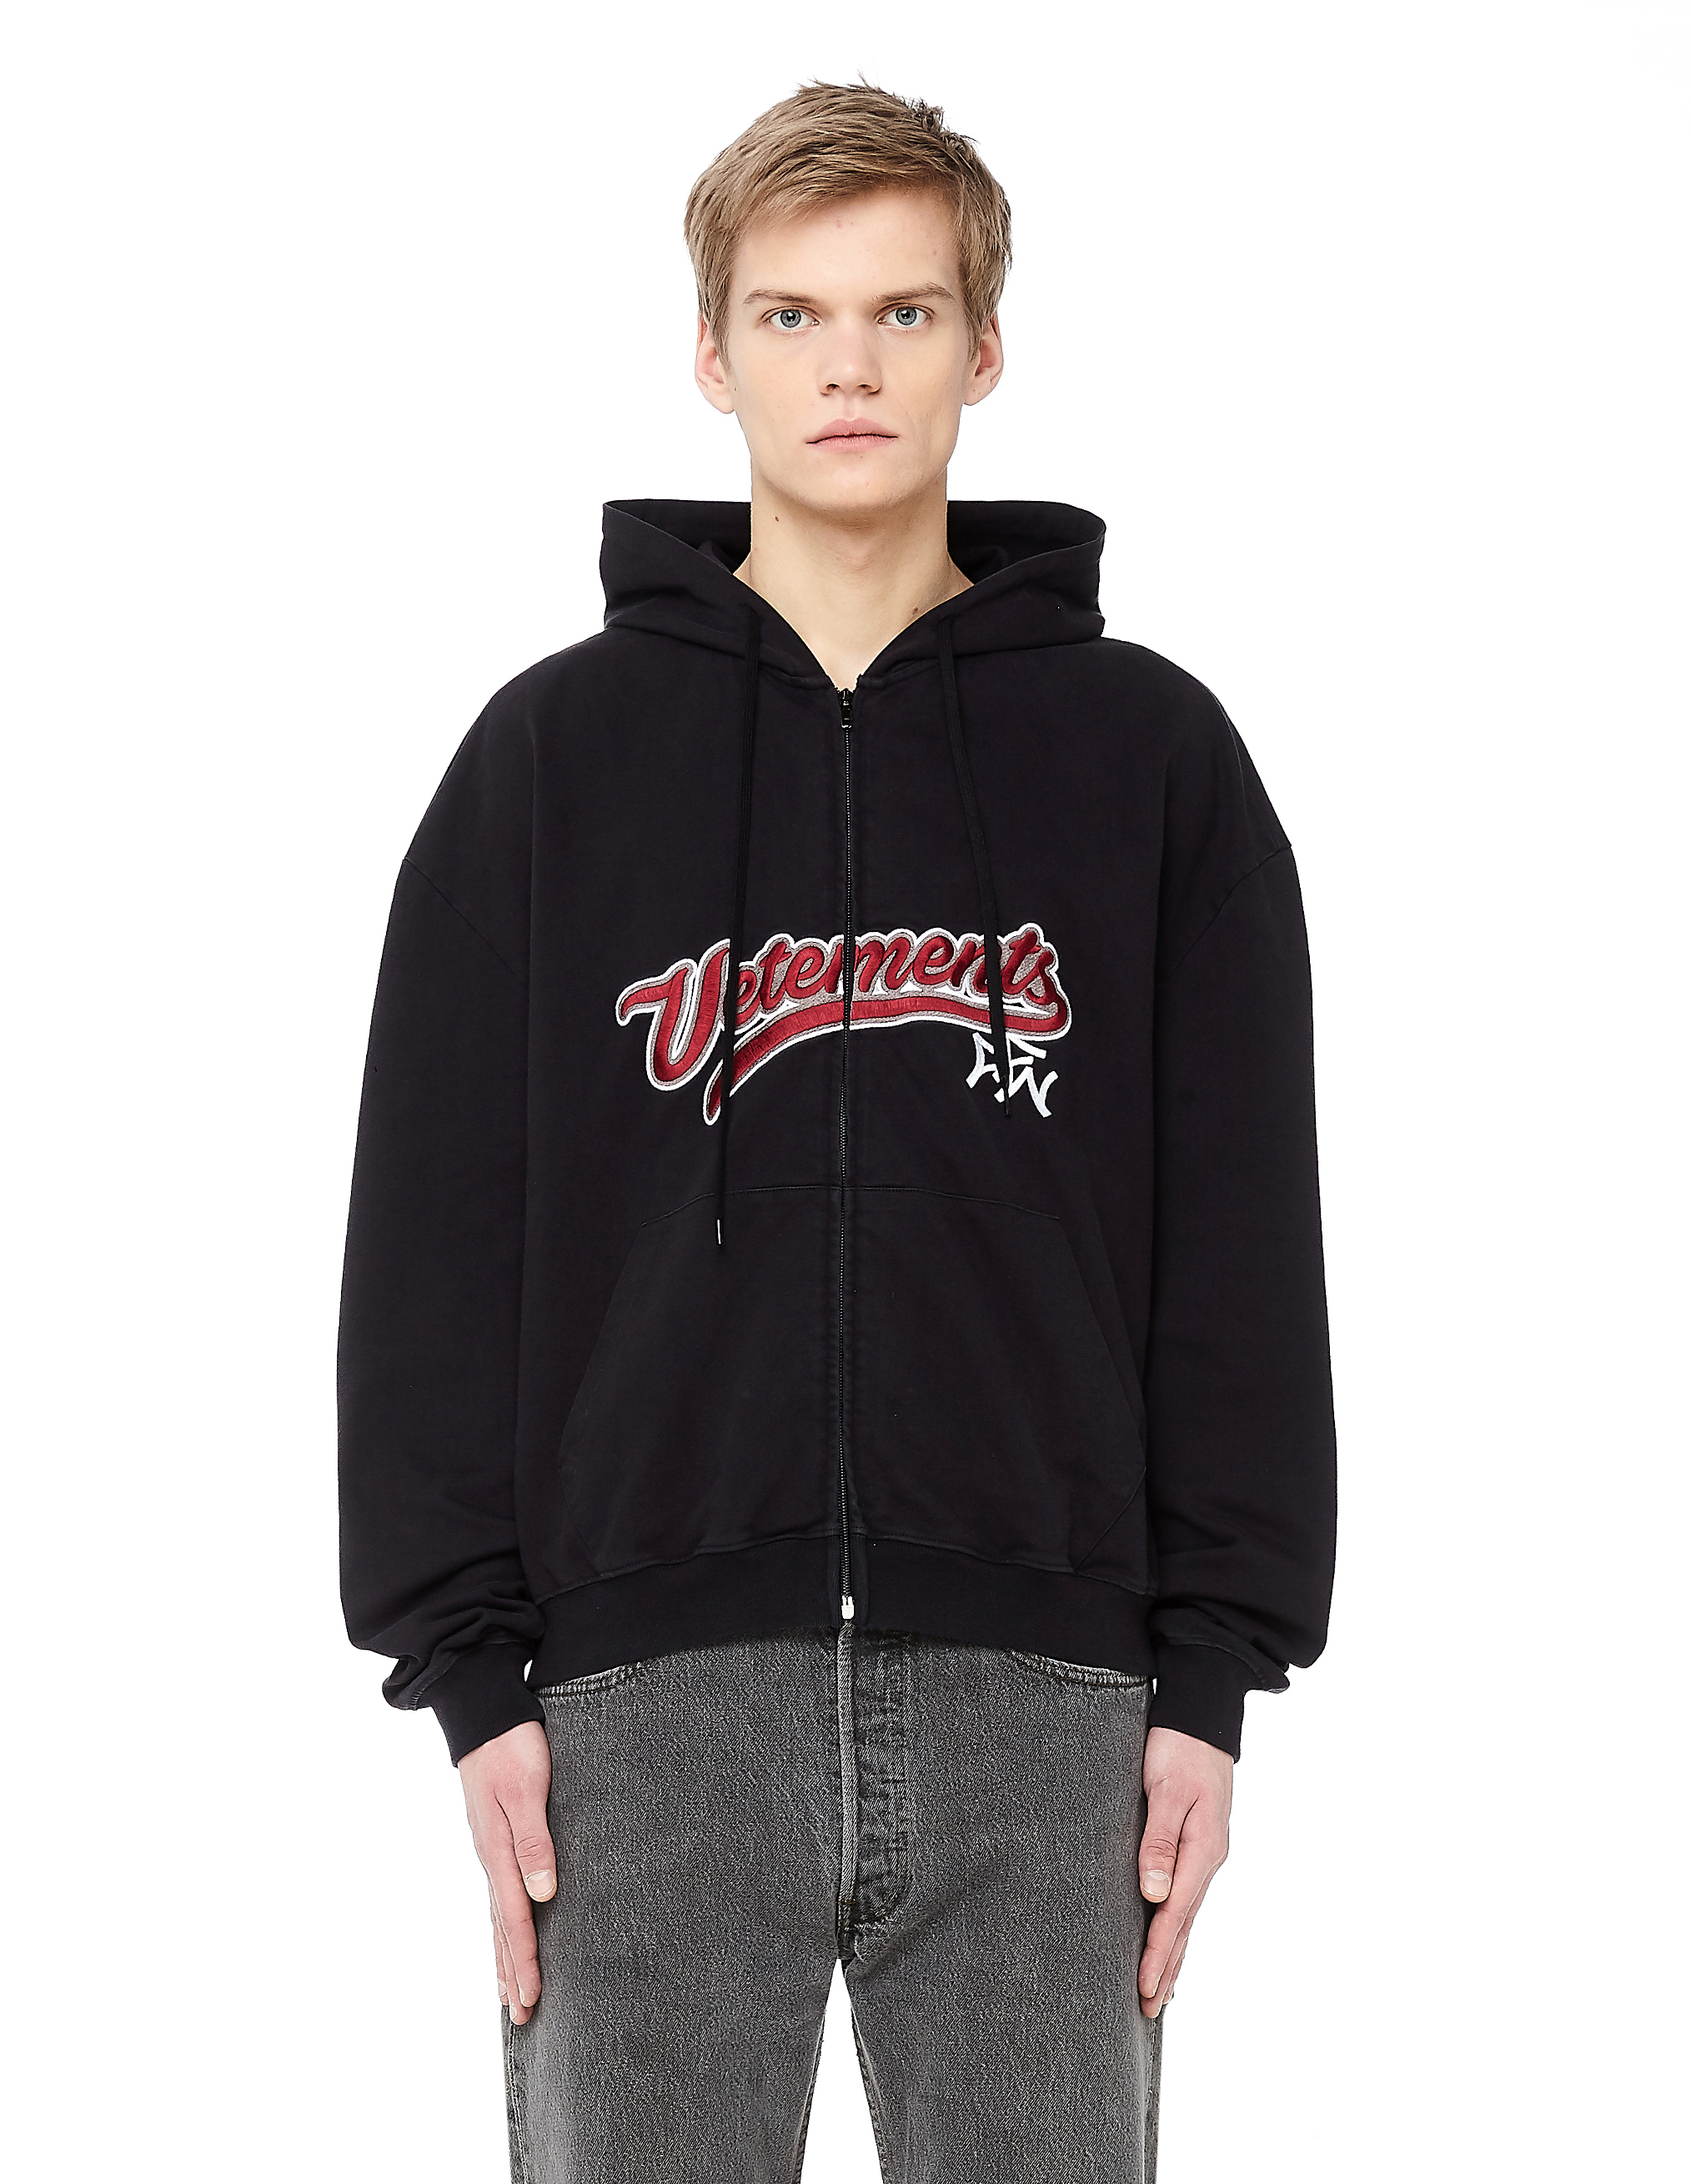 Vetements | Men's Cotton Embroidered Hoodie | SVMOSCOW.COM